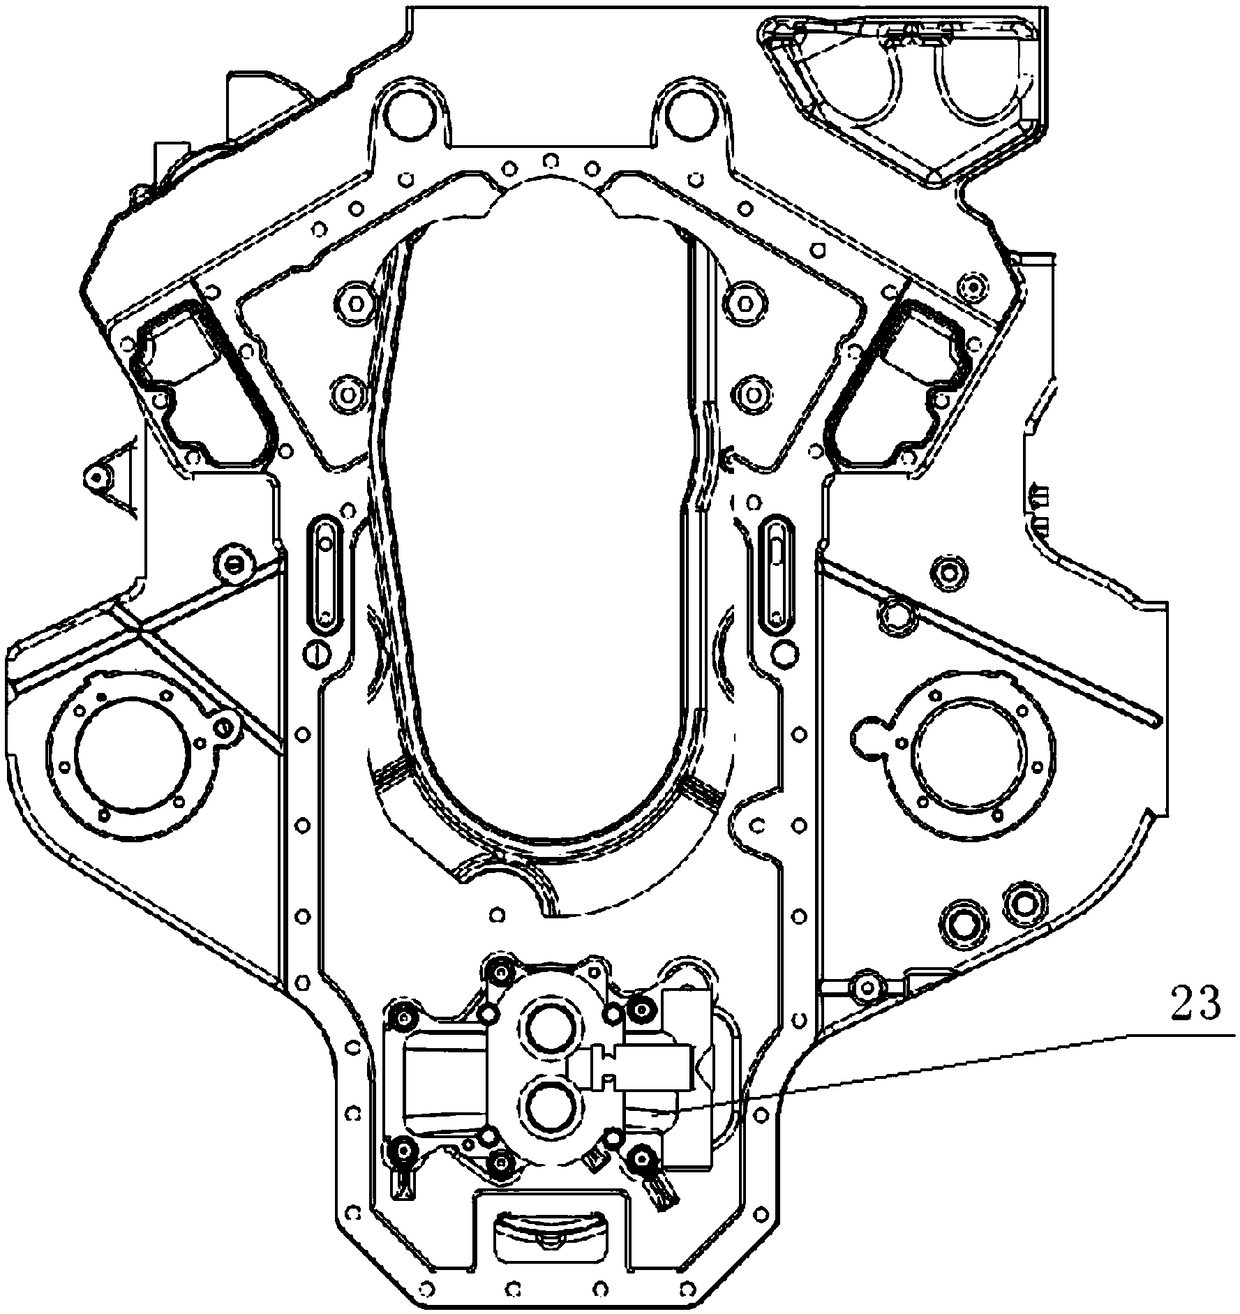 Built-in installation structure of an engine and its oil pump